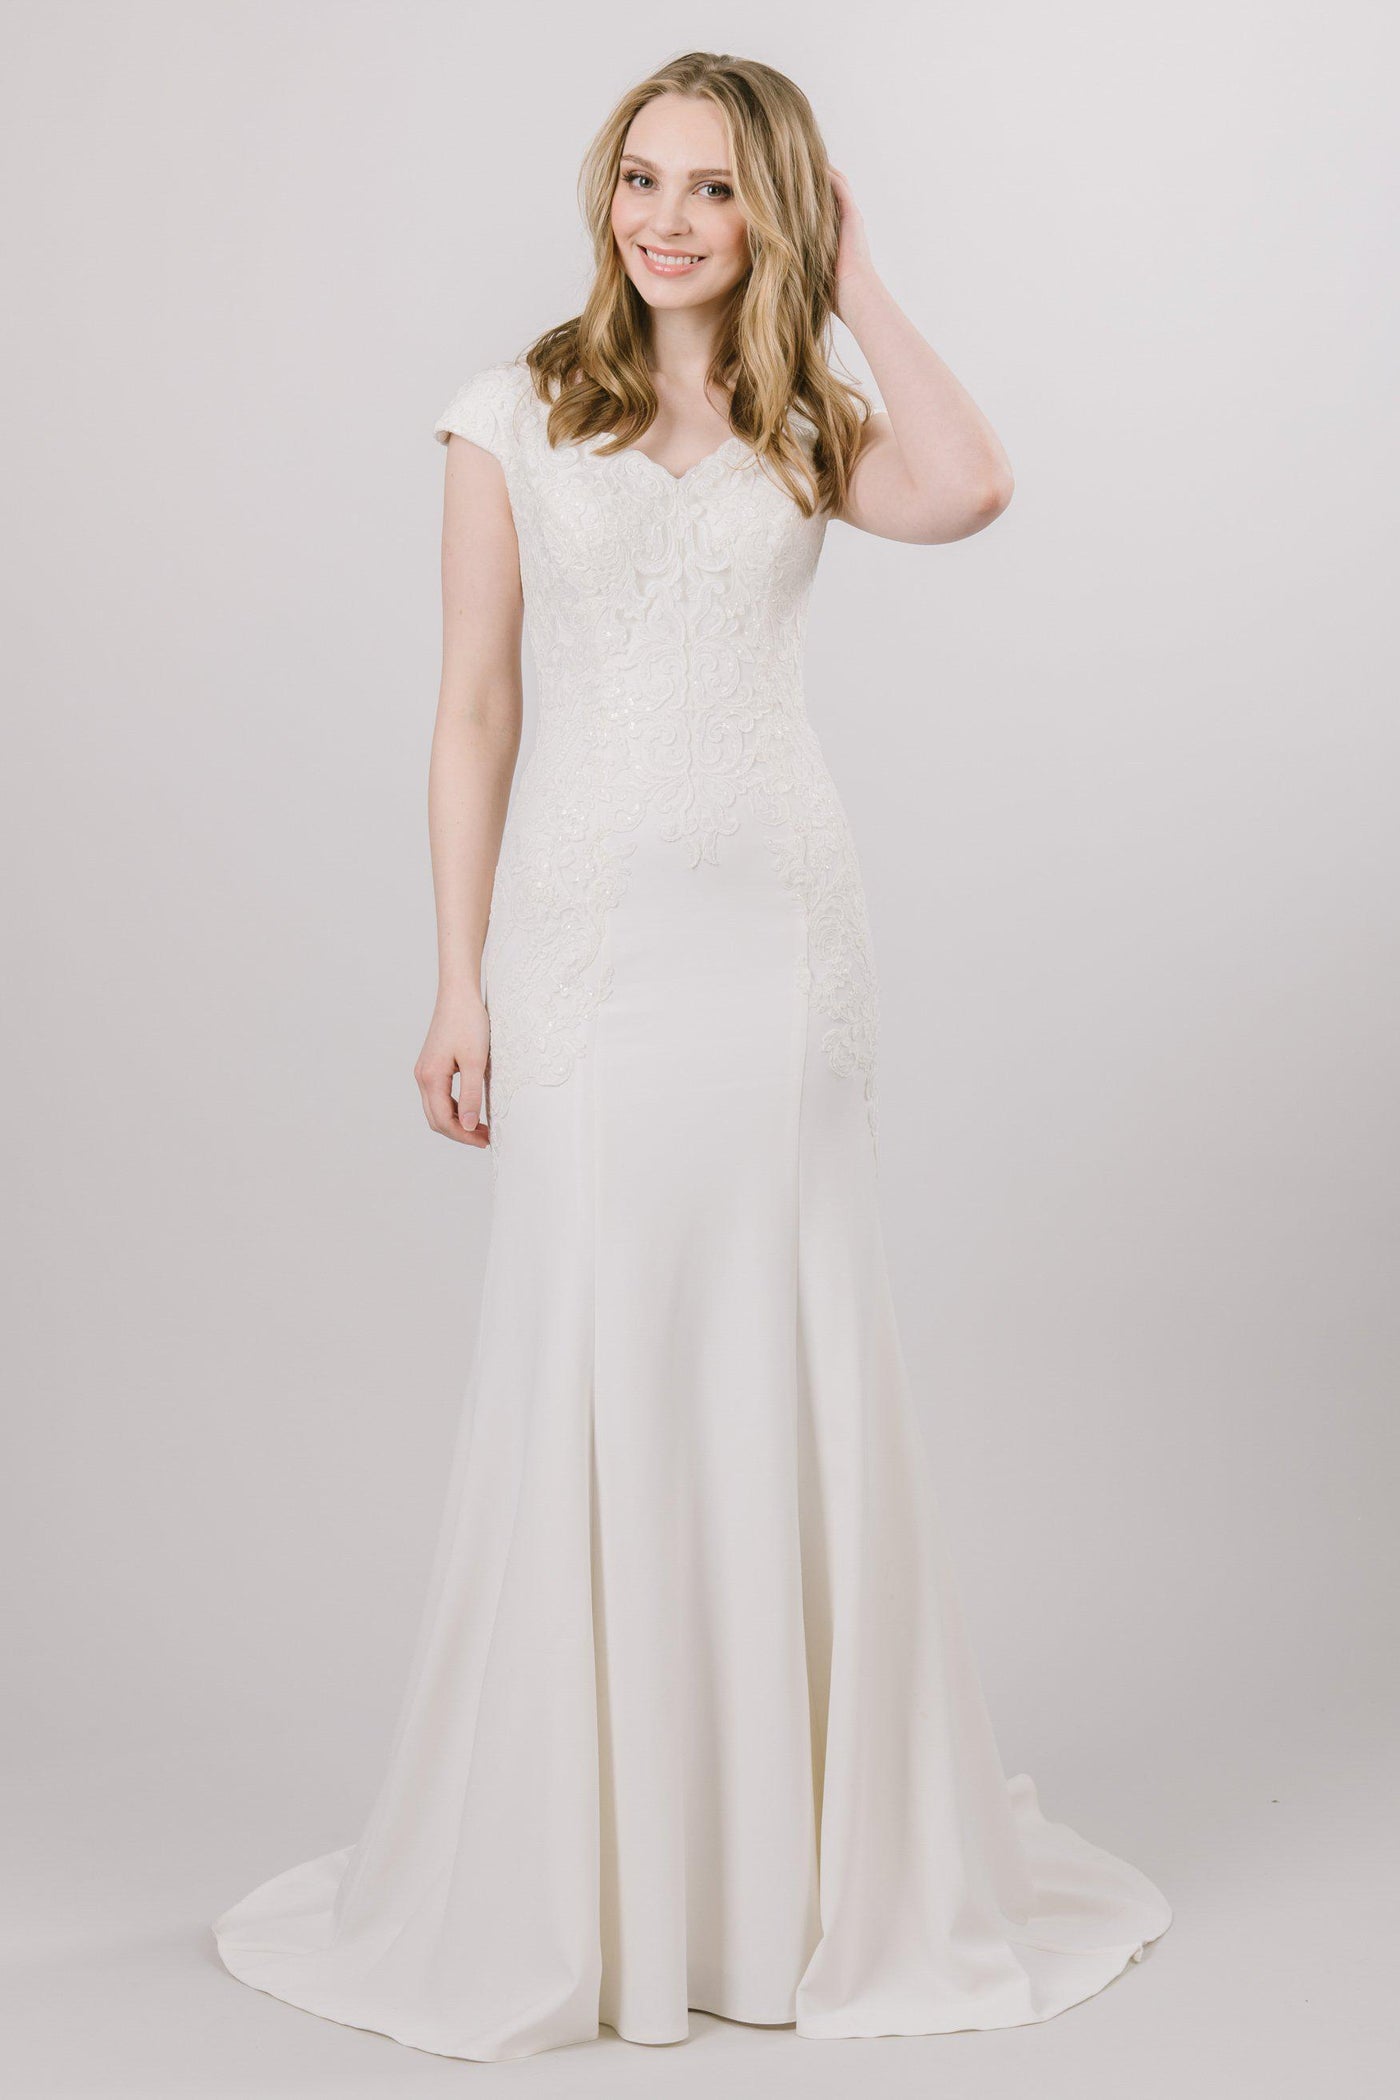 Soft fit and flare dress with beading on the top that moves down the modest wedding dress at salt lake city bridal shop